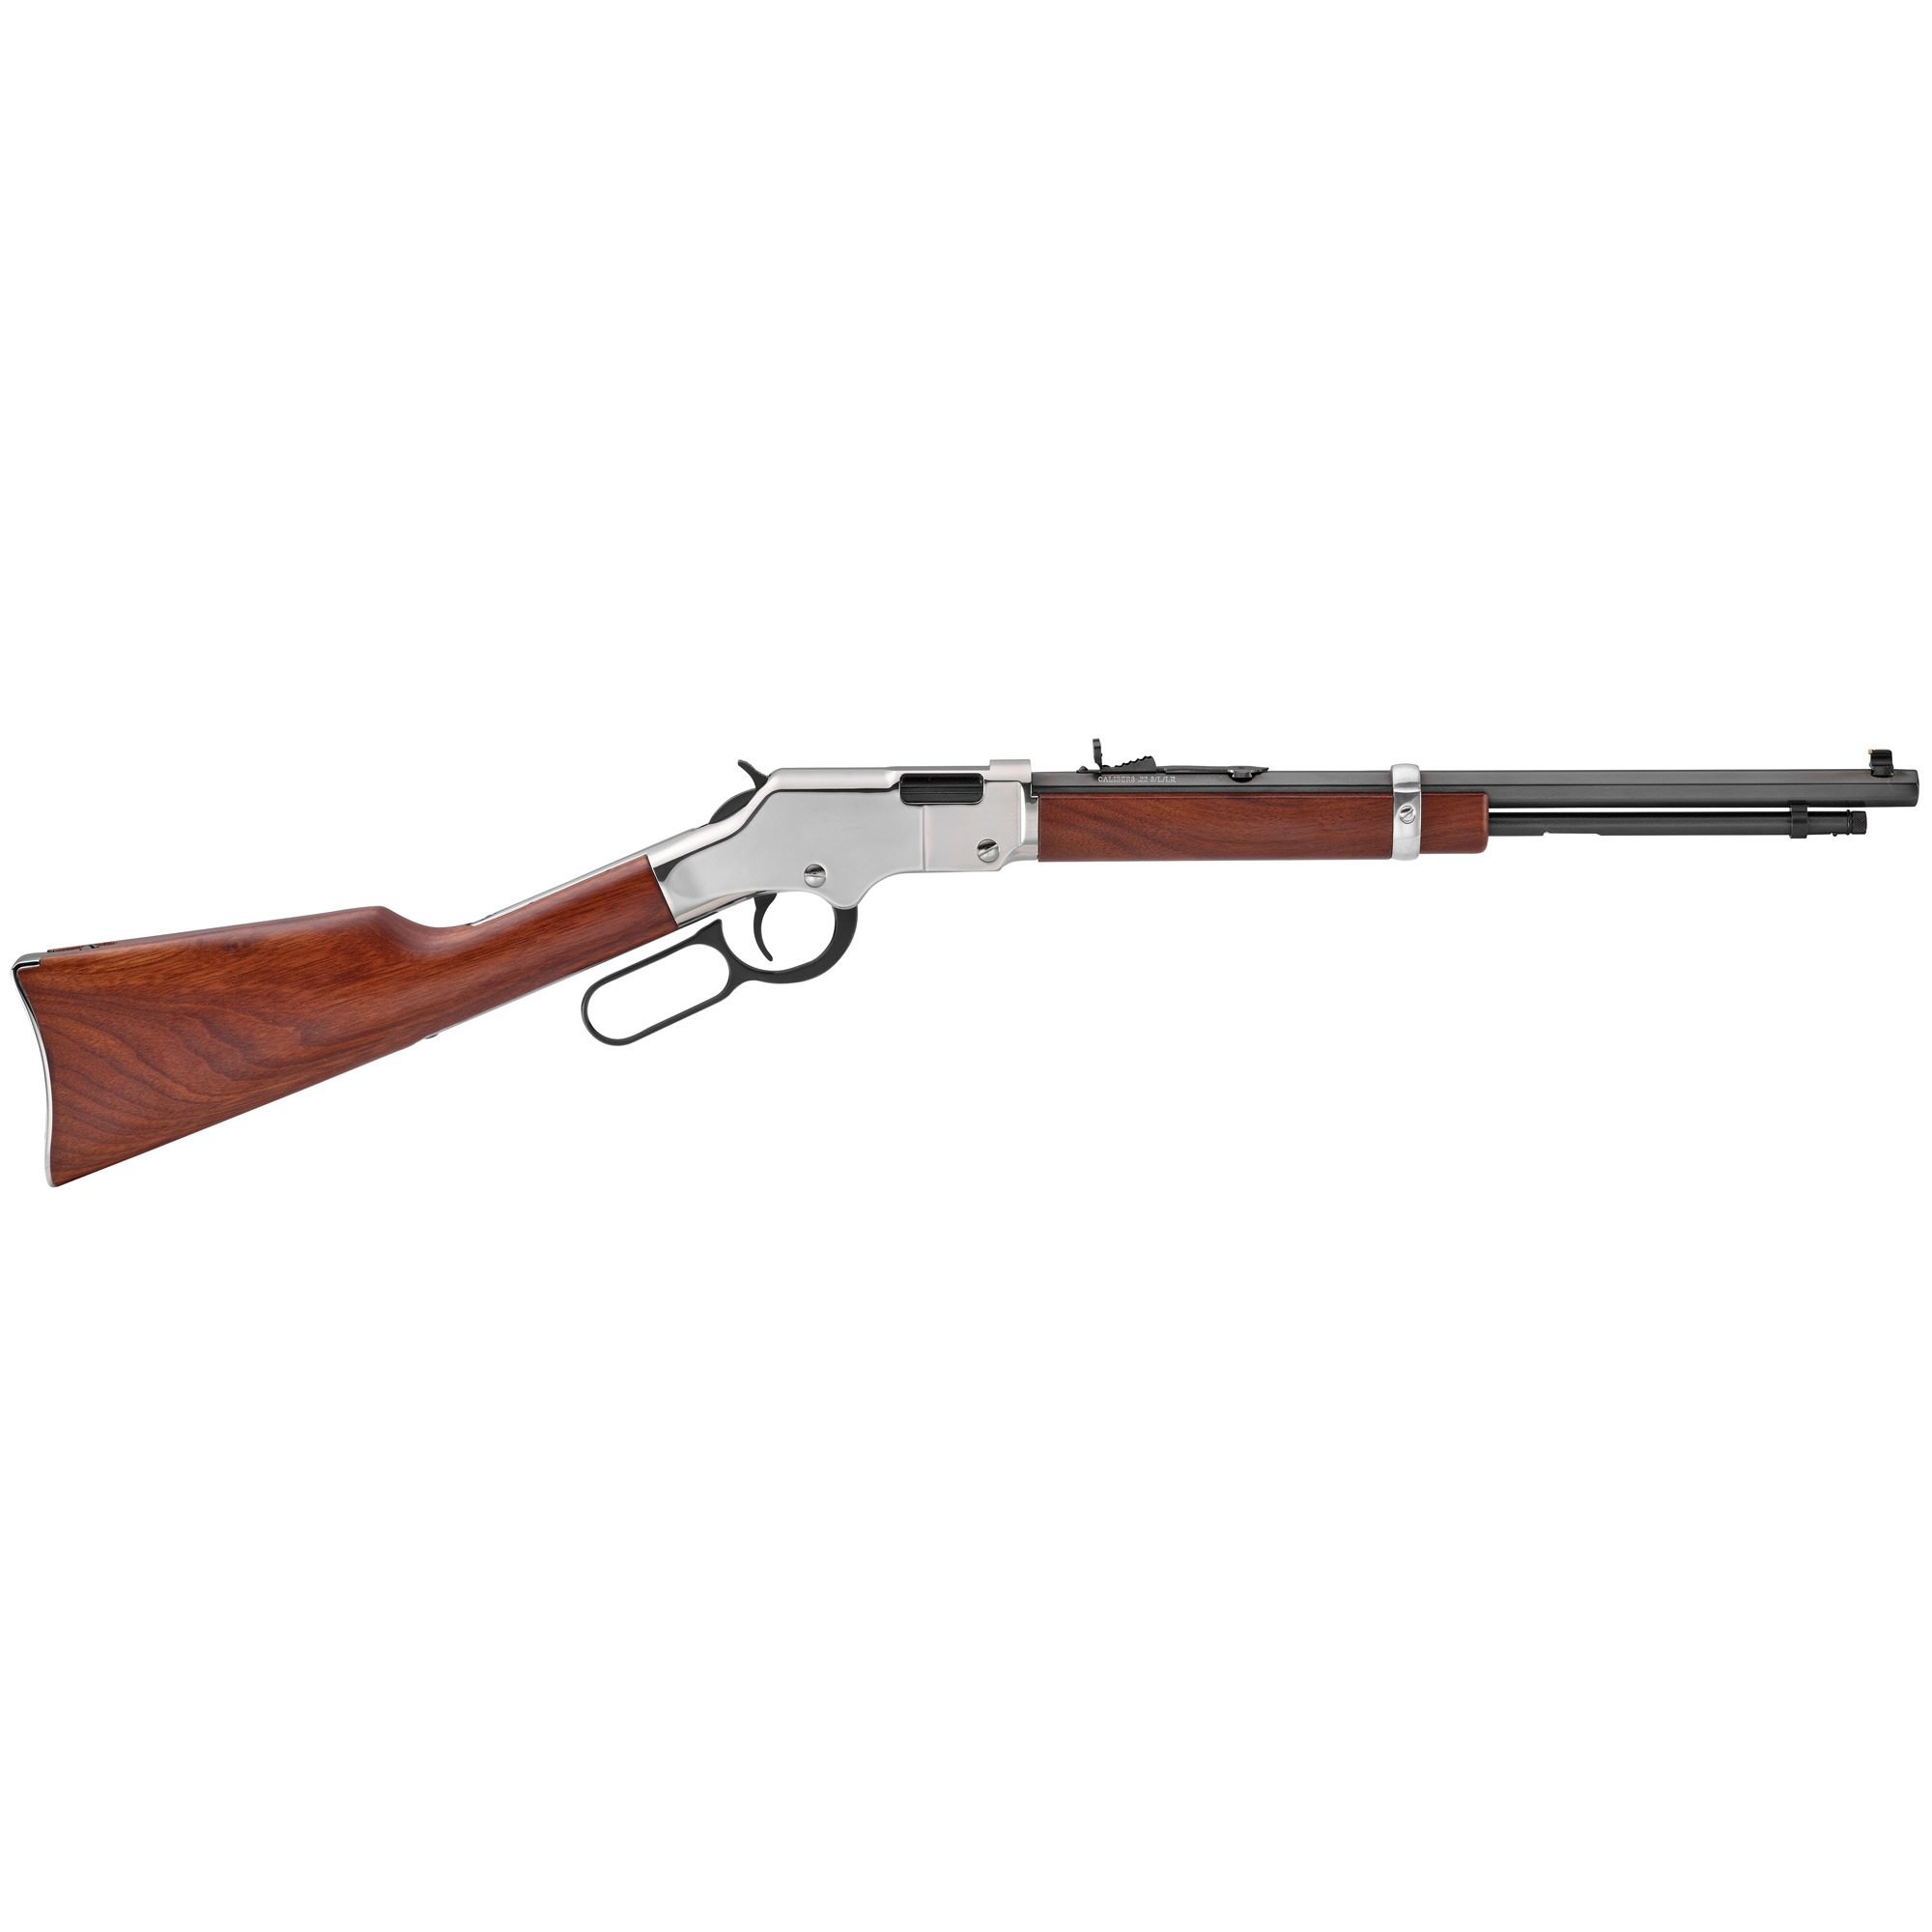 Henry Repeating Arms, Golden Boy Silver Youth, Lever Action, 22 LR, 17" Octagon Barrel, 12Rd, Adjustable Sights